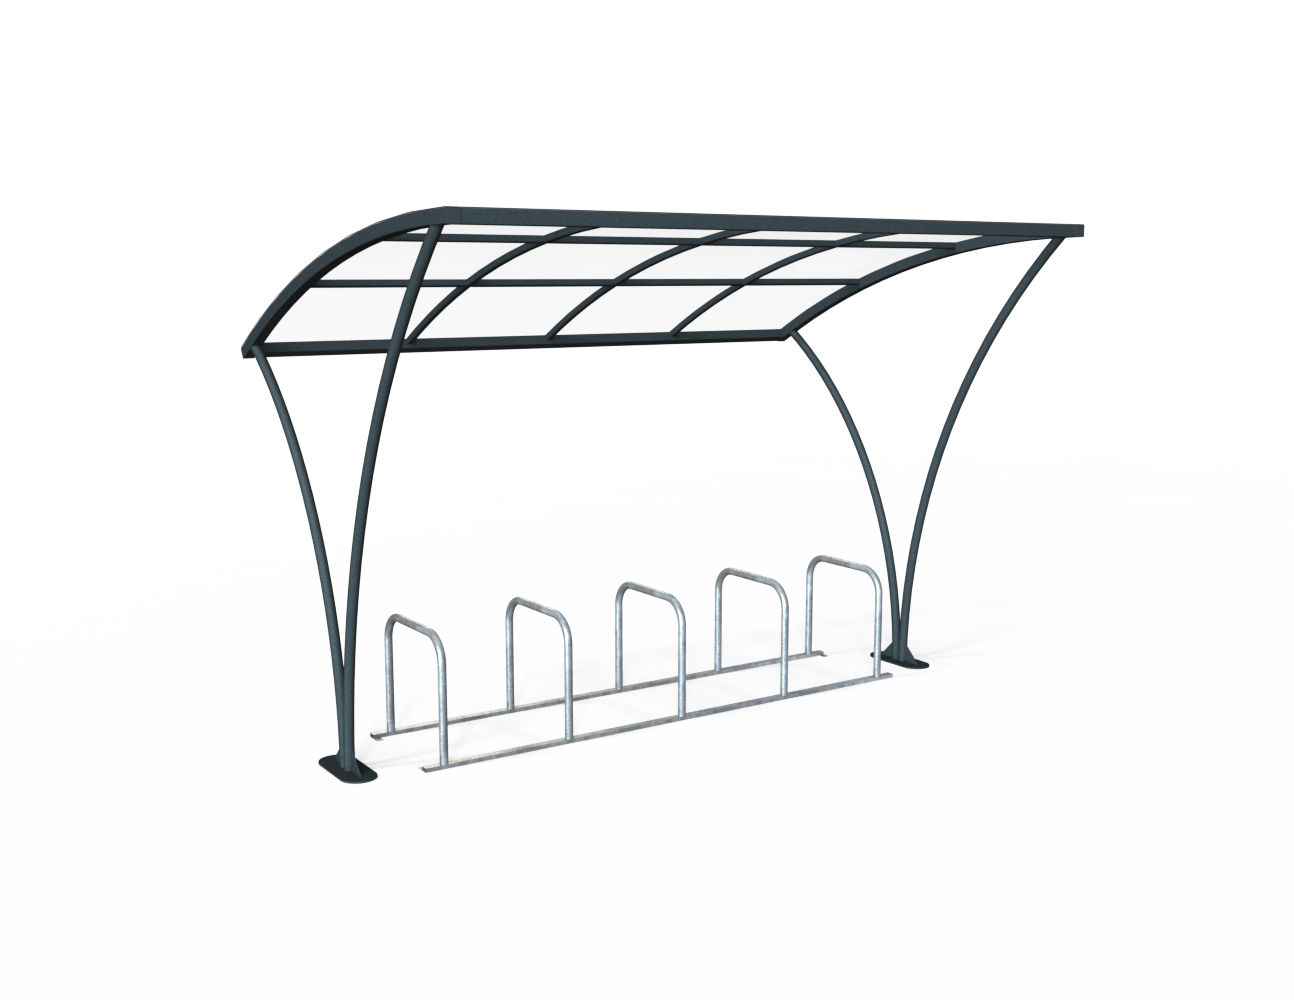 Windermere Cycle Shelter